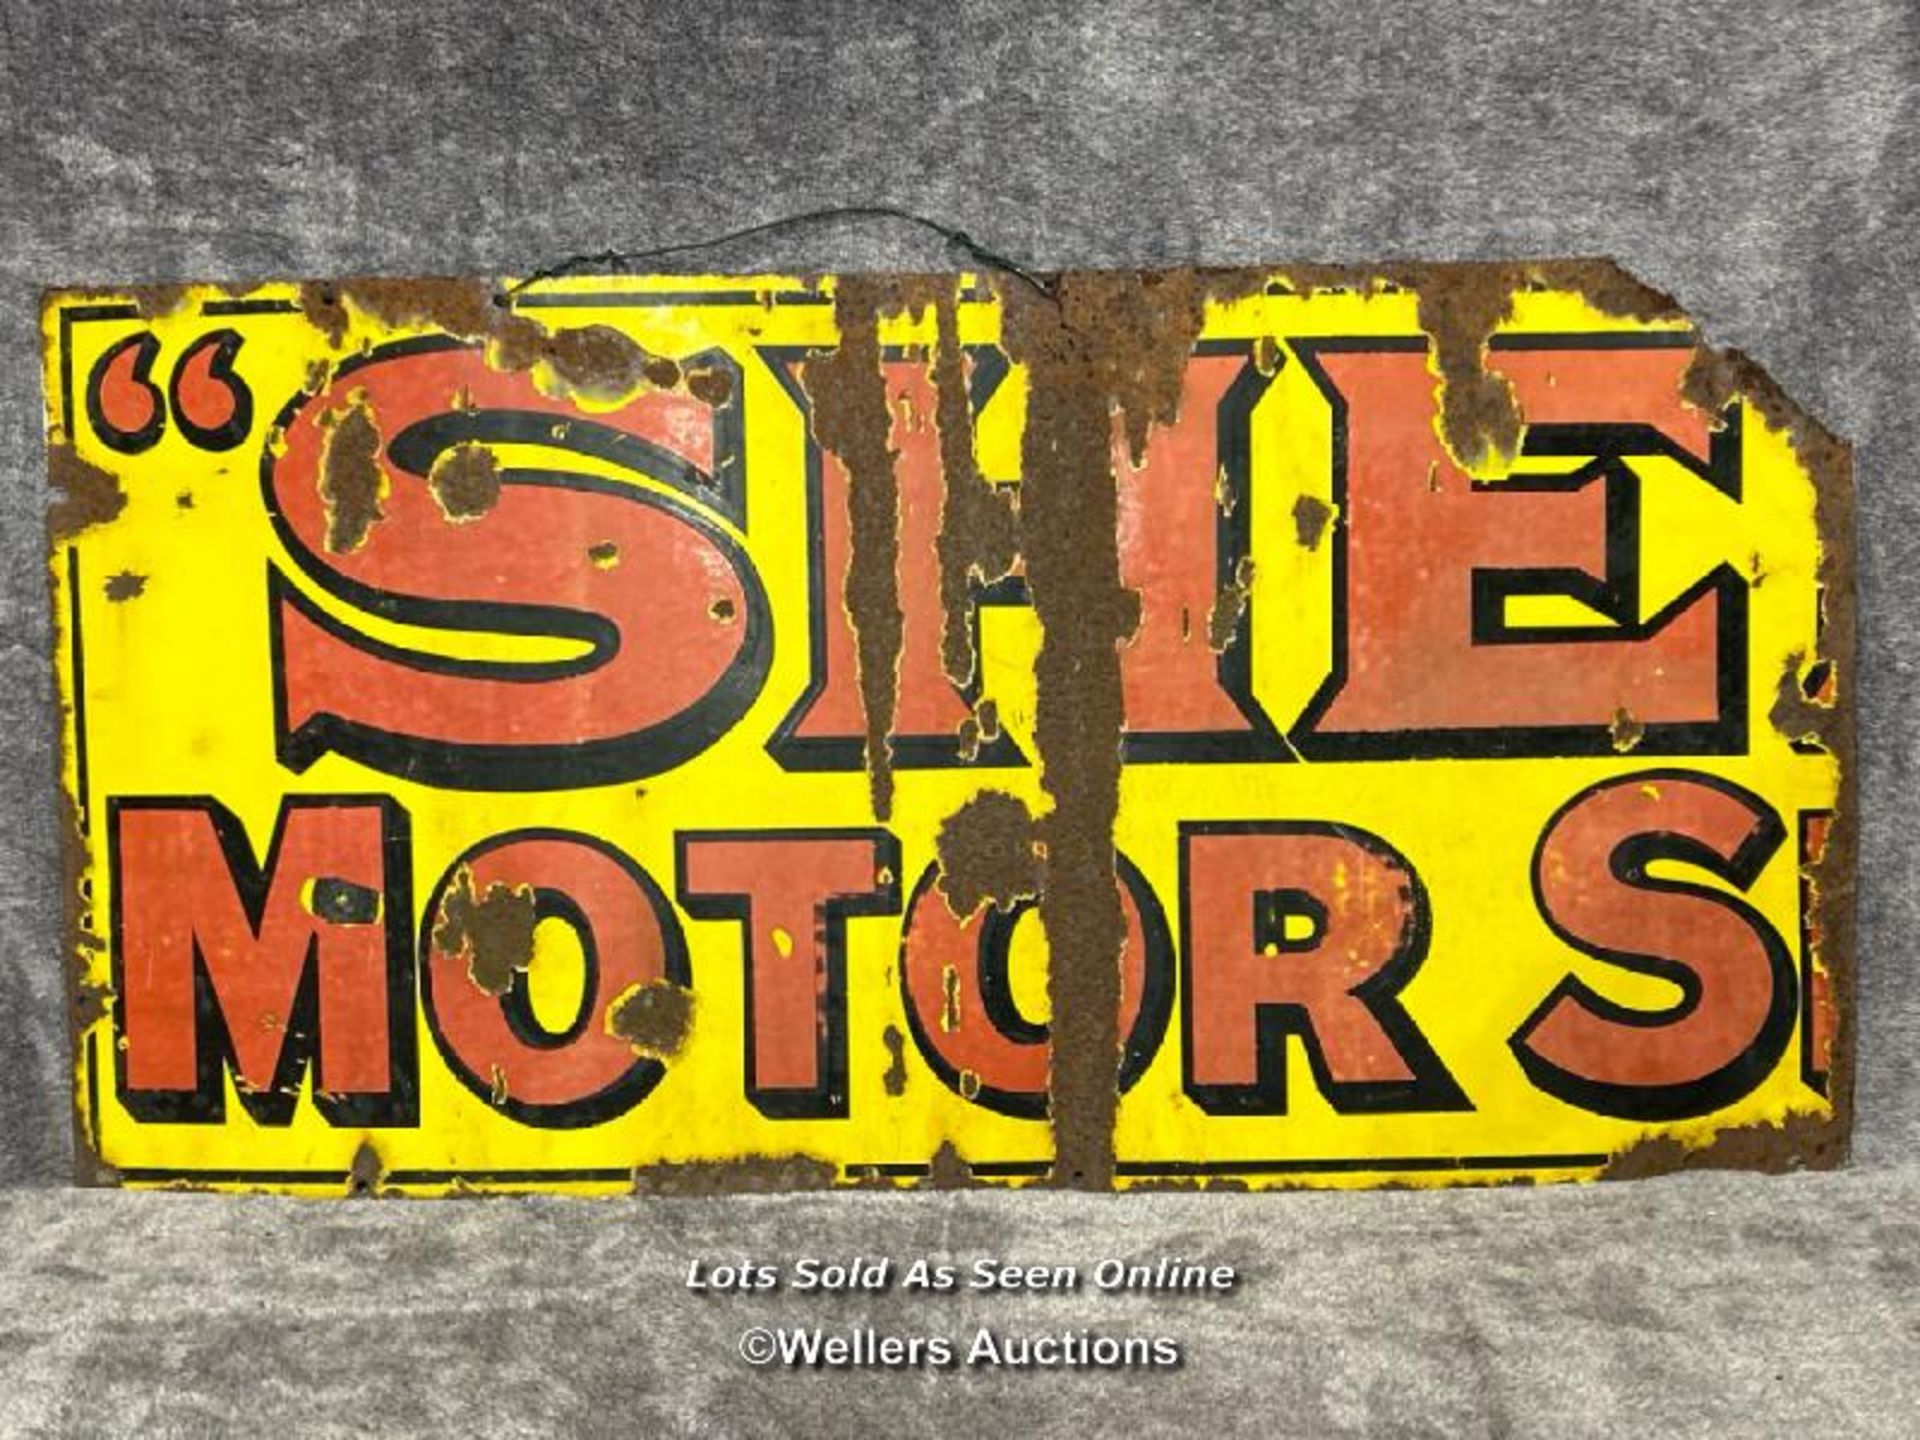 Half of a vintage "Shell Motor Spirit" red & yellow enamel sign, 90 x 46cm / AN25